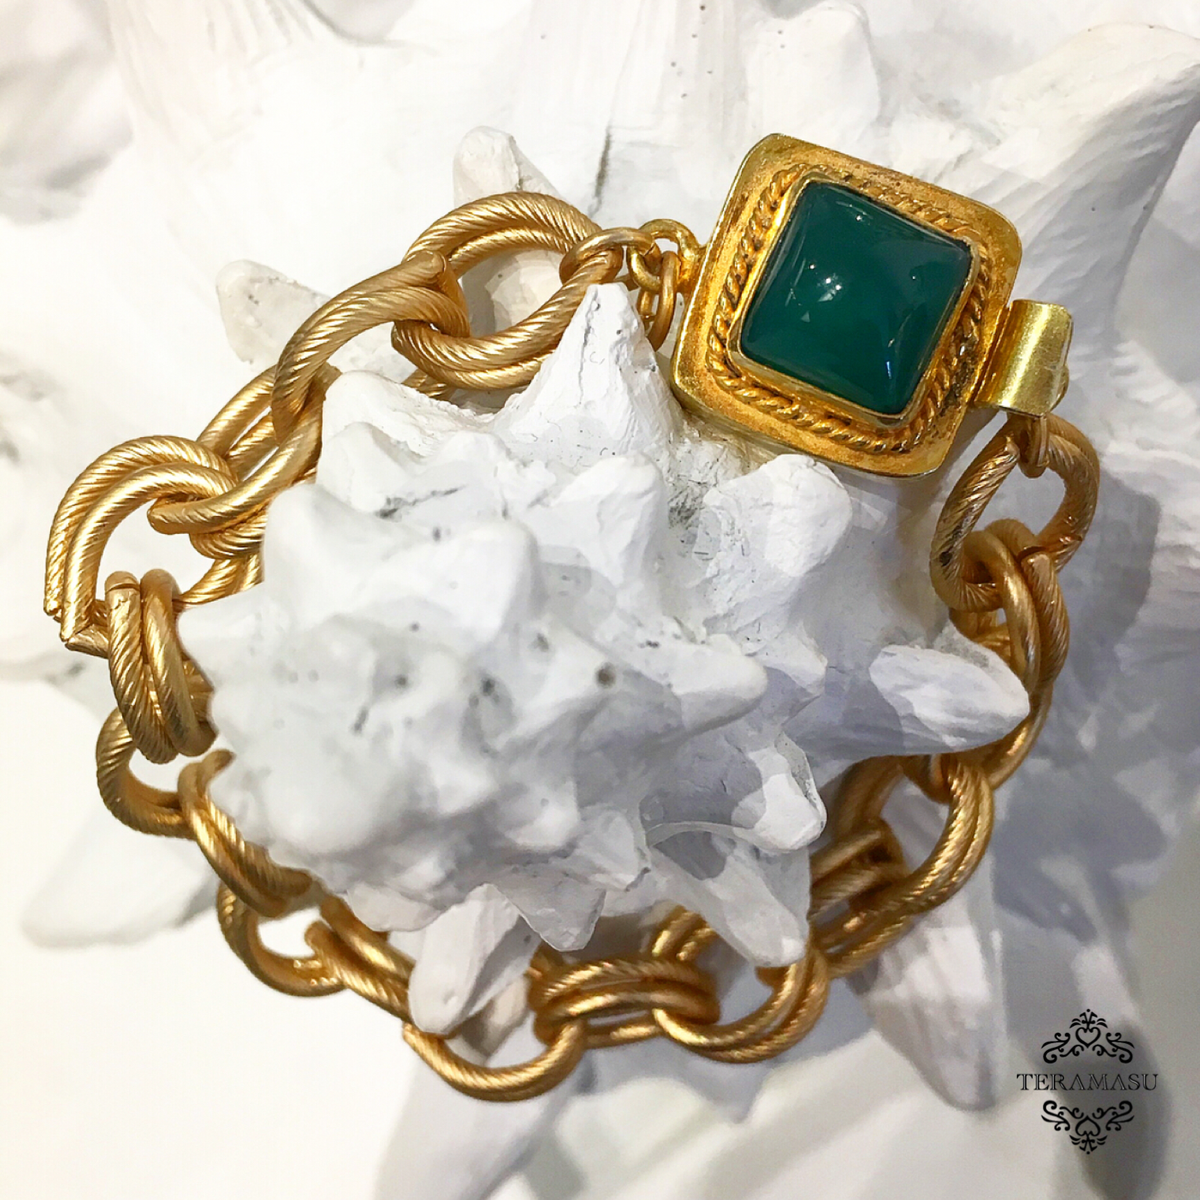 "Want It" Wednesday: The Perfect Dark Green and Gold Vintage-Inspired Statement Bracelet for Fall